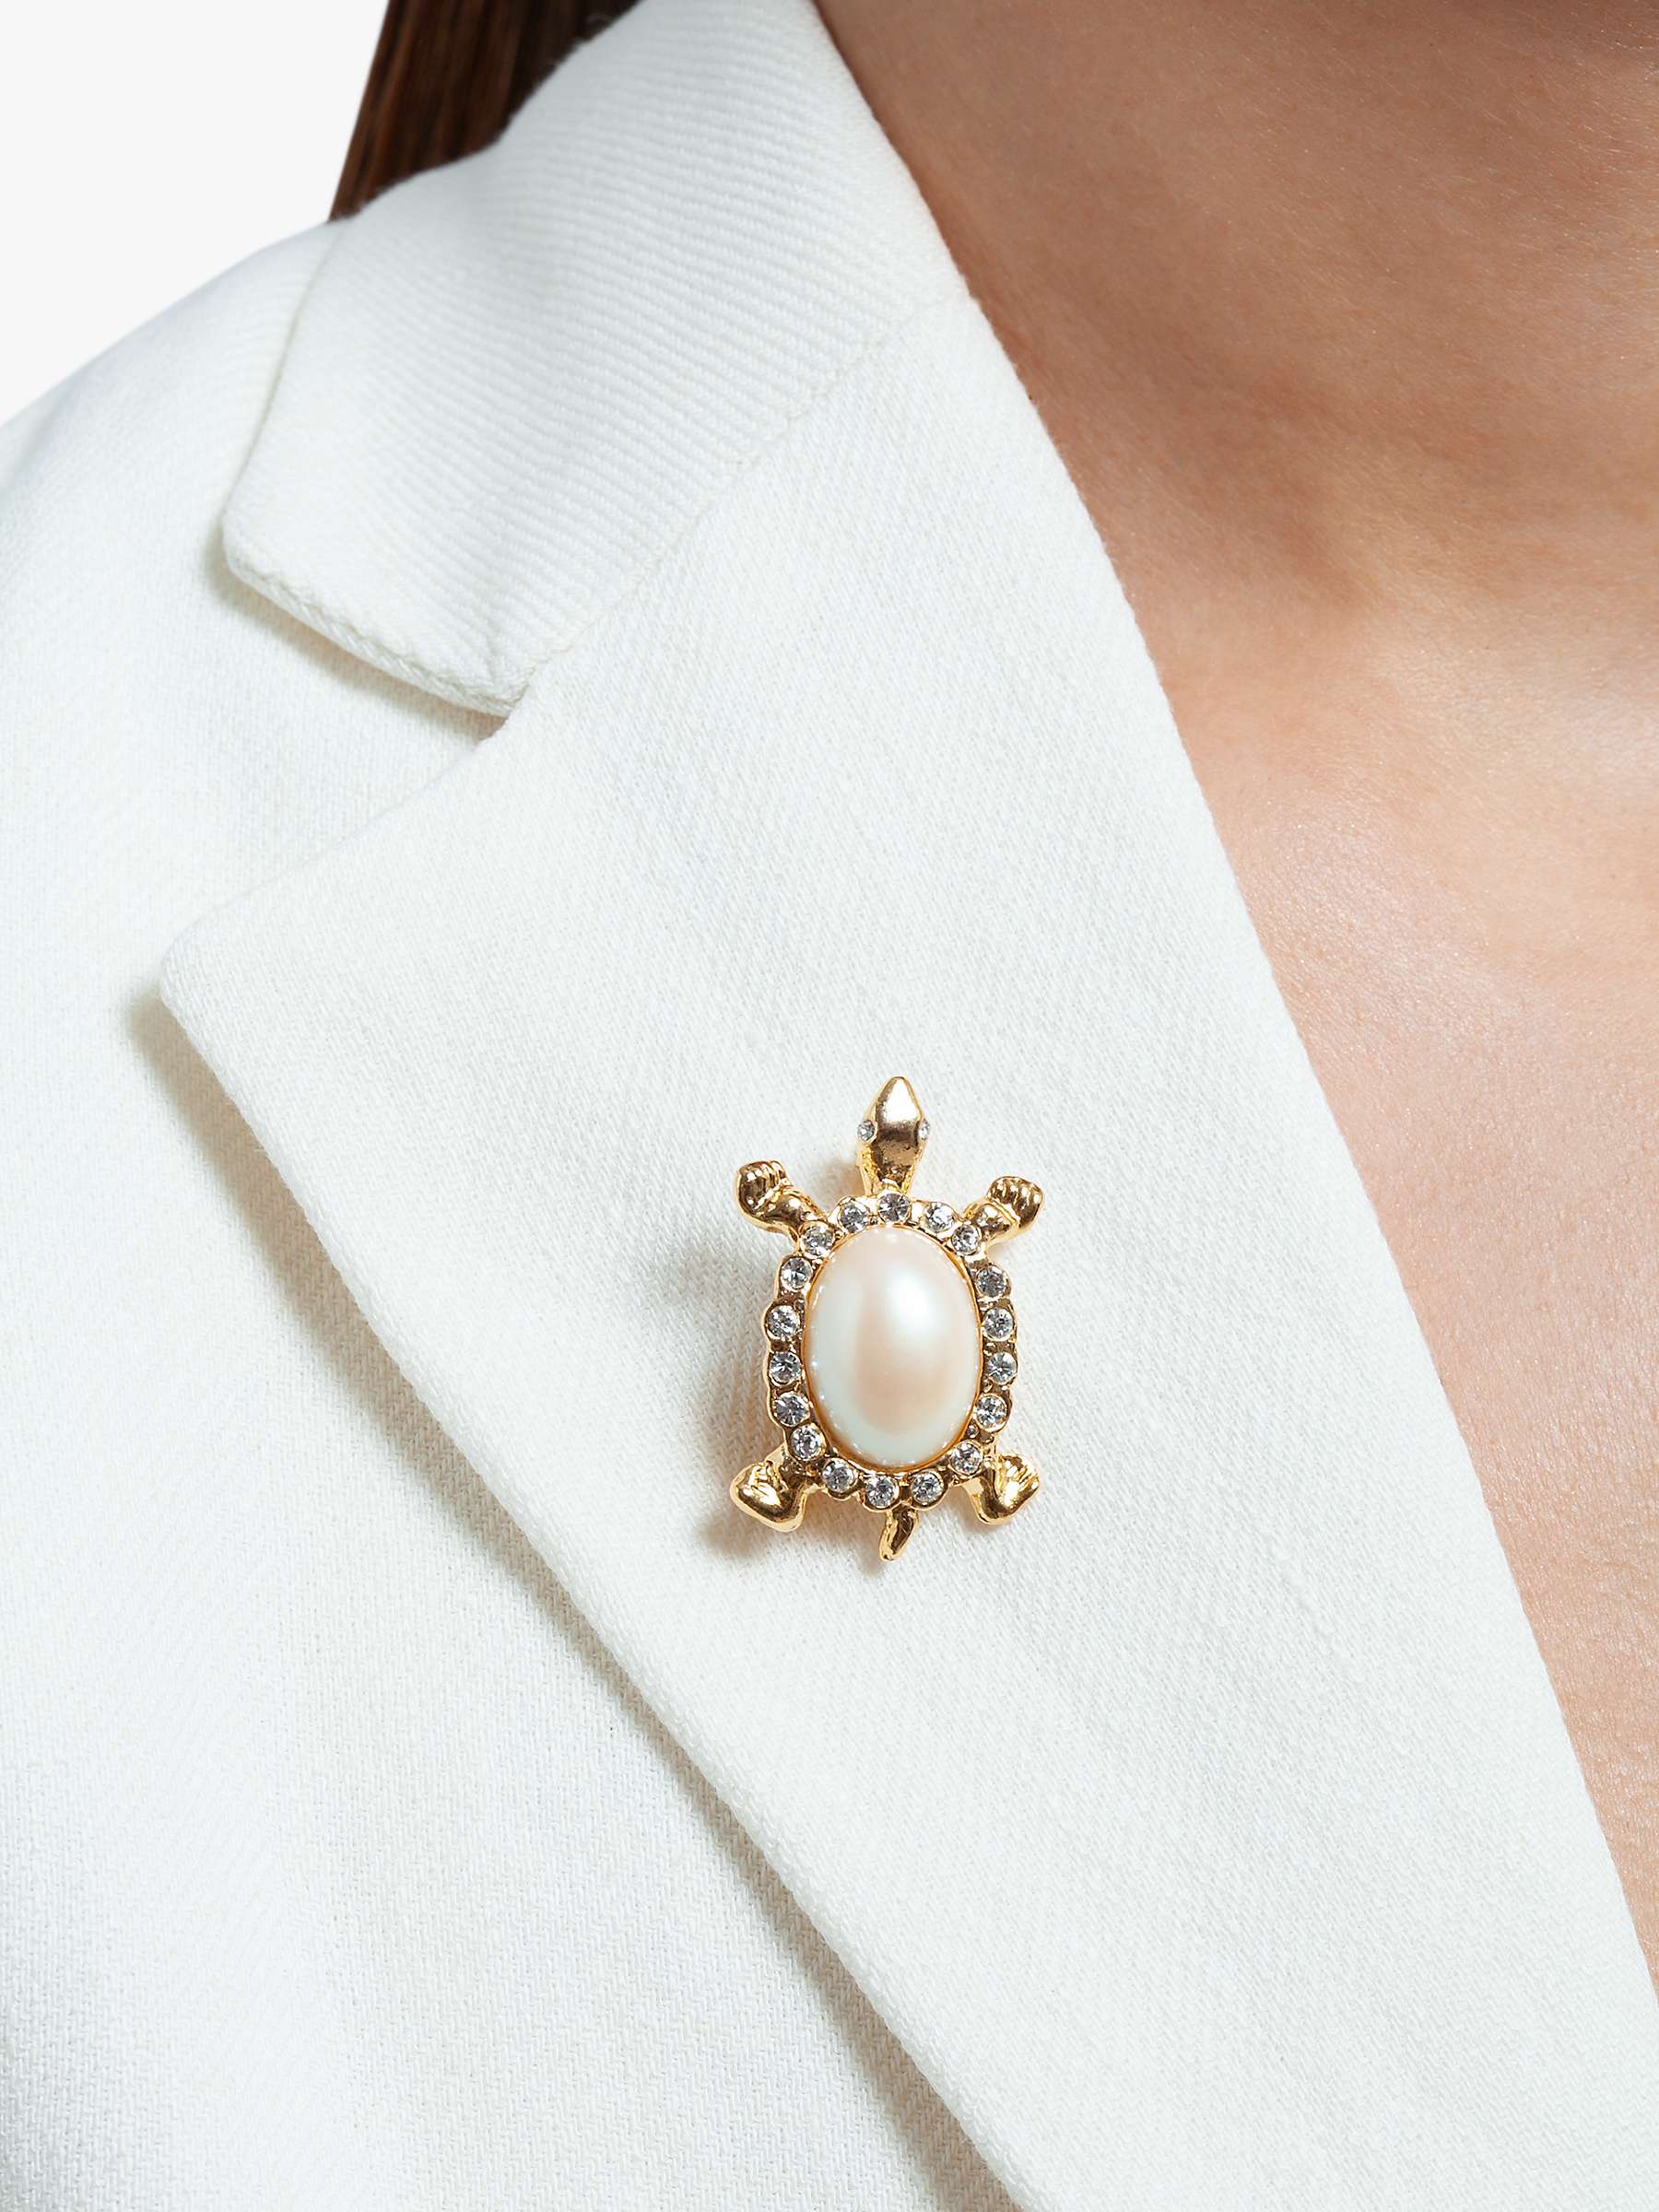 Buy Susan Caplan Vintage Rediscovered Collection Gold Plated Swarovski Crystal & Faux Pearl Turtle Brooch, Dated Circa 1980s Online at johnlewis.com